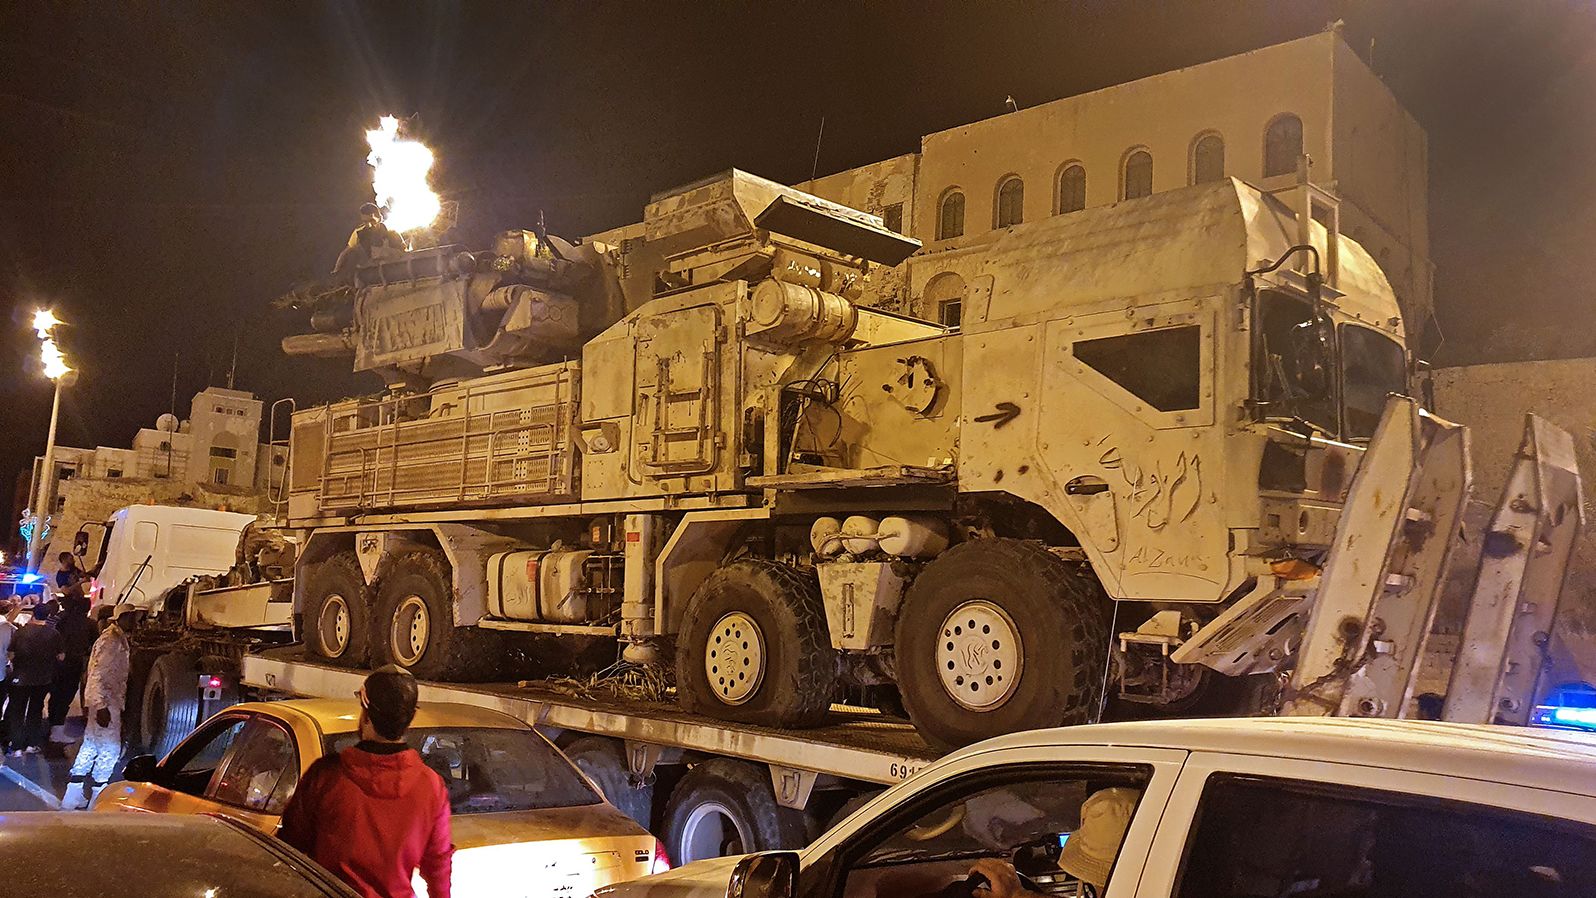 Forces loyal to Libya's UN-recognized government parade a Russian-made Pantsir air defense system truck in Tripoli on May 20, after its capture from forces loyal to Khalifa Haftar at al Watiya airbase.